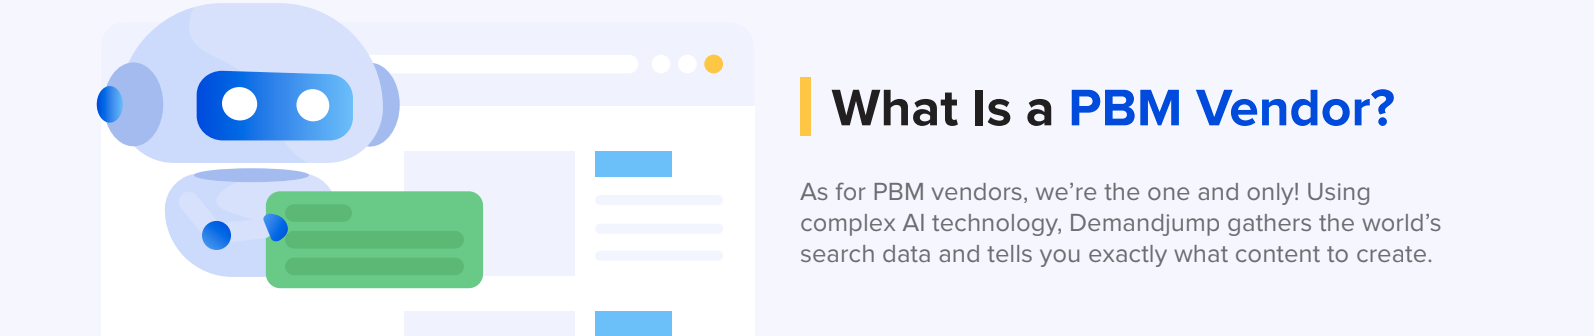 What is a PBM vendor?